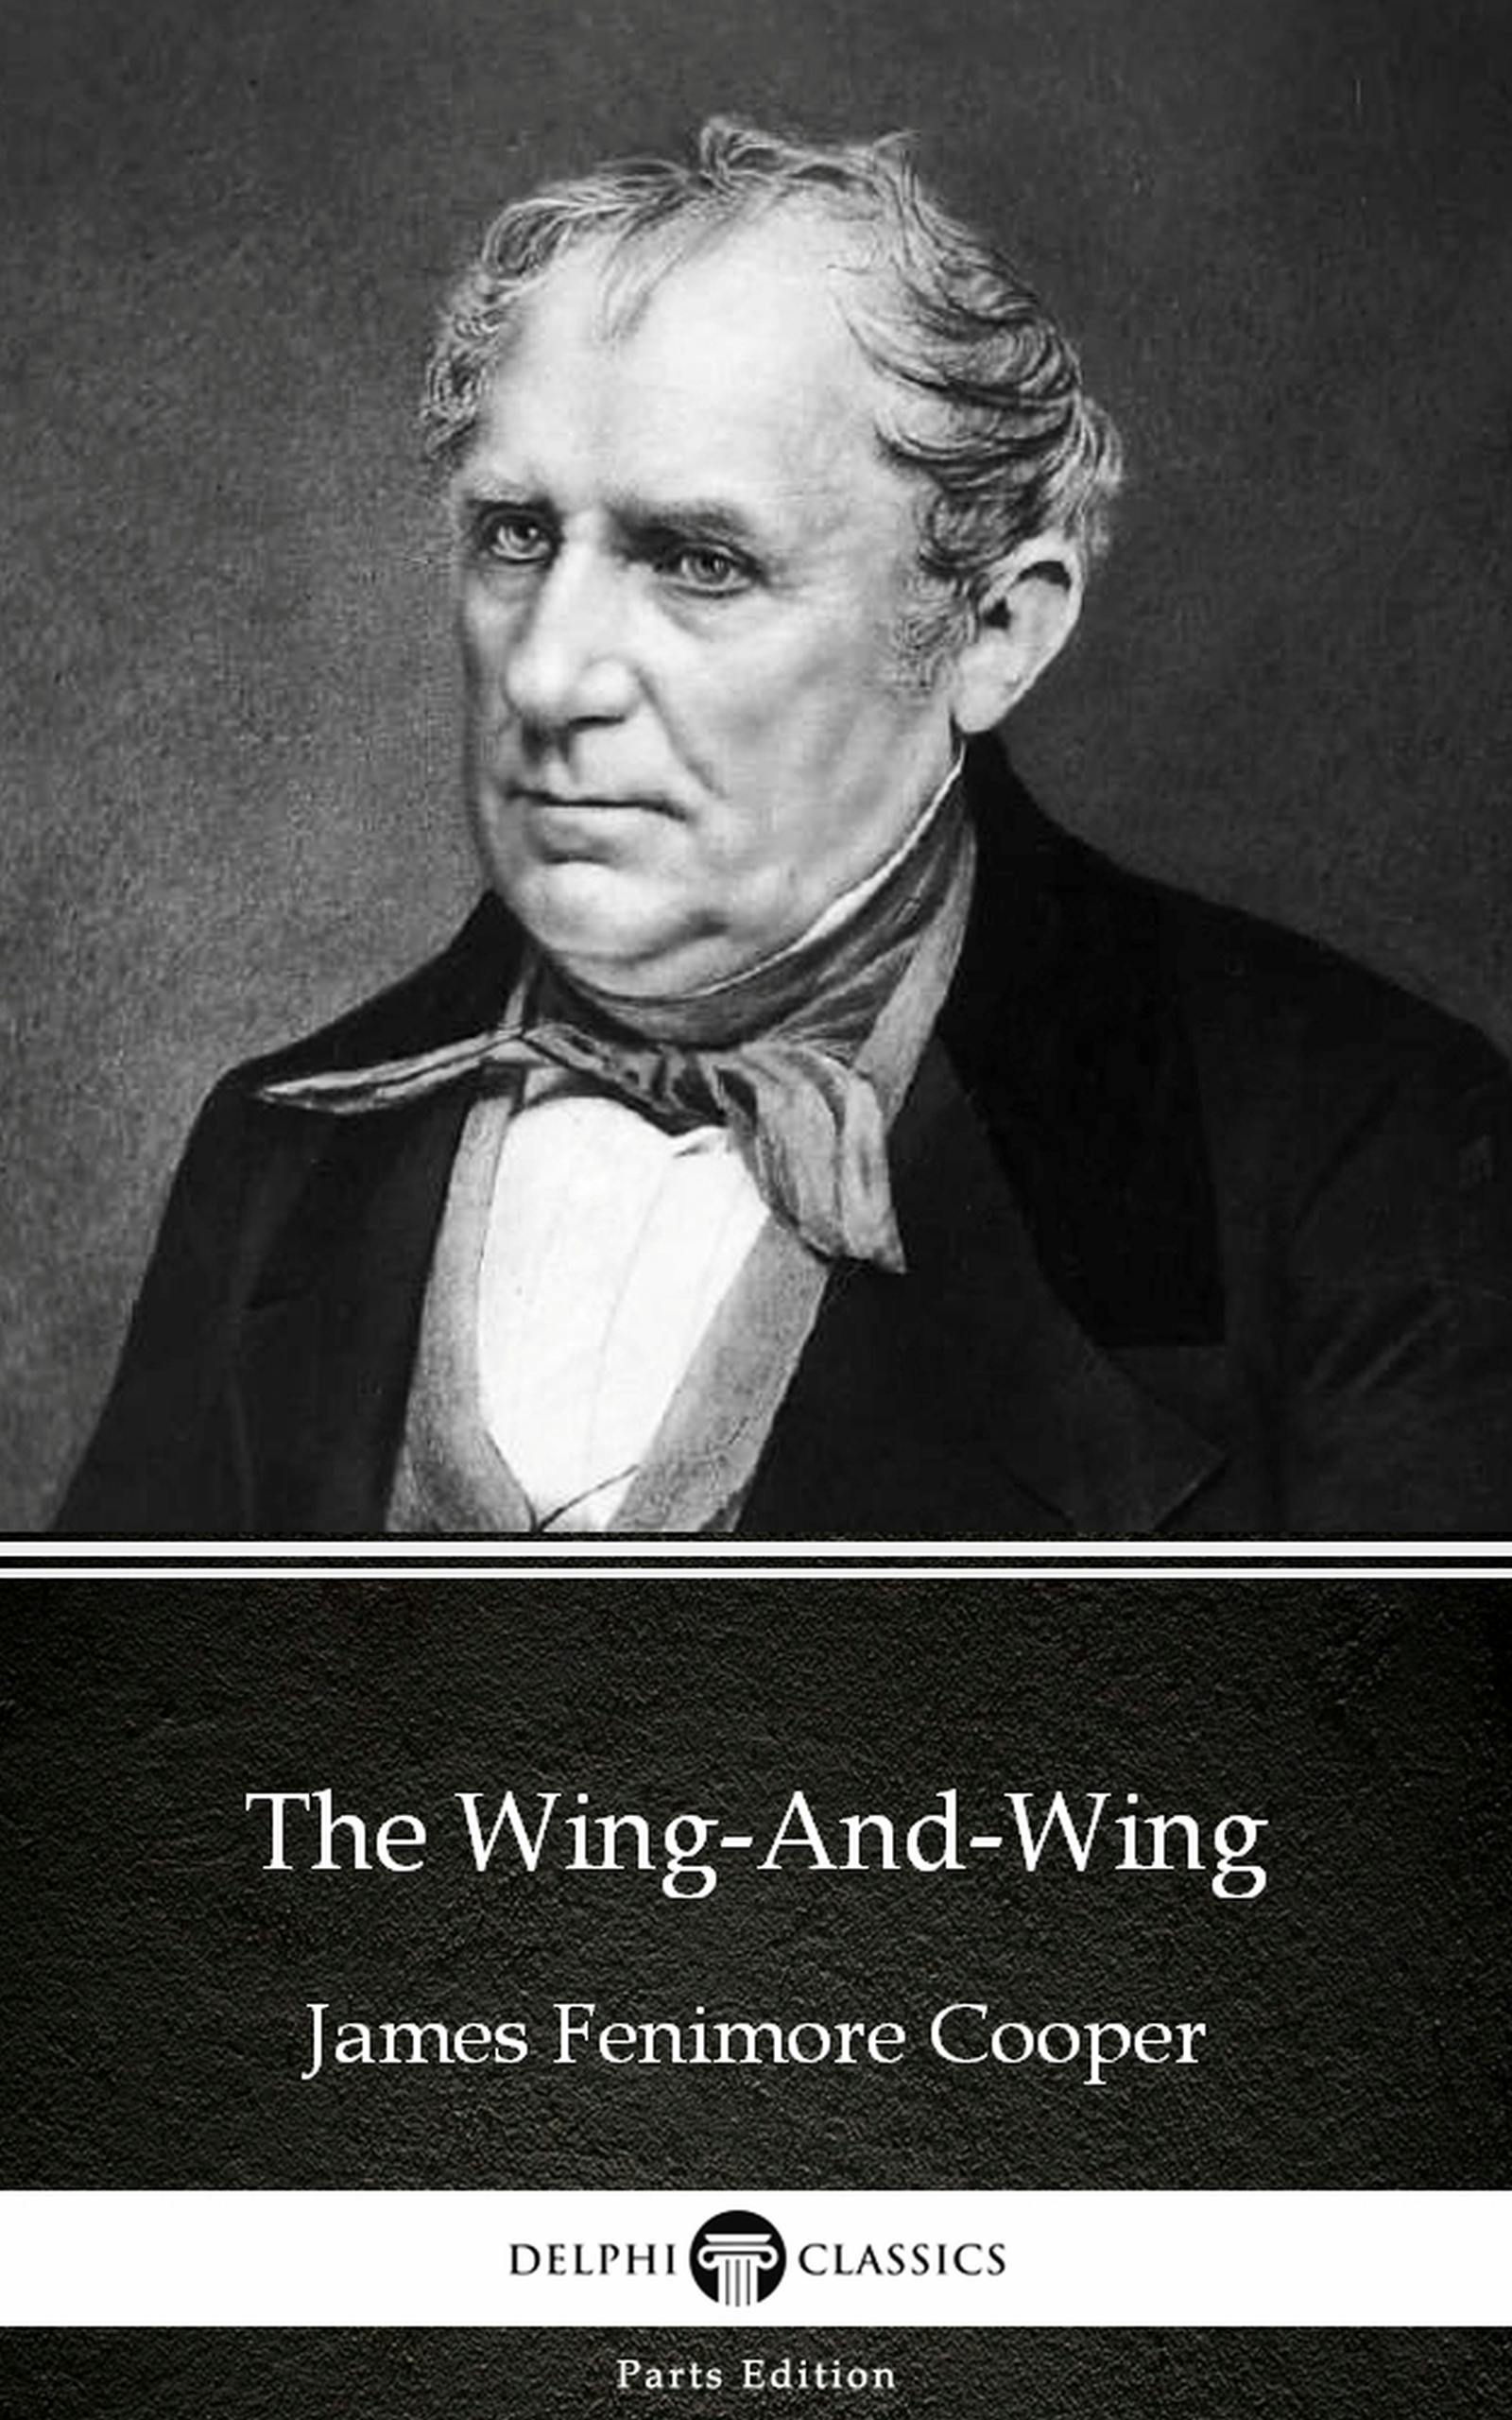 The Wing-And-Wing by James Fenimore Cooper - Delphi Classics (Illustrated) - James Fenimore Cooper